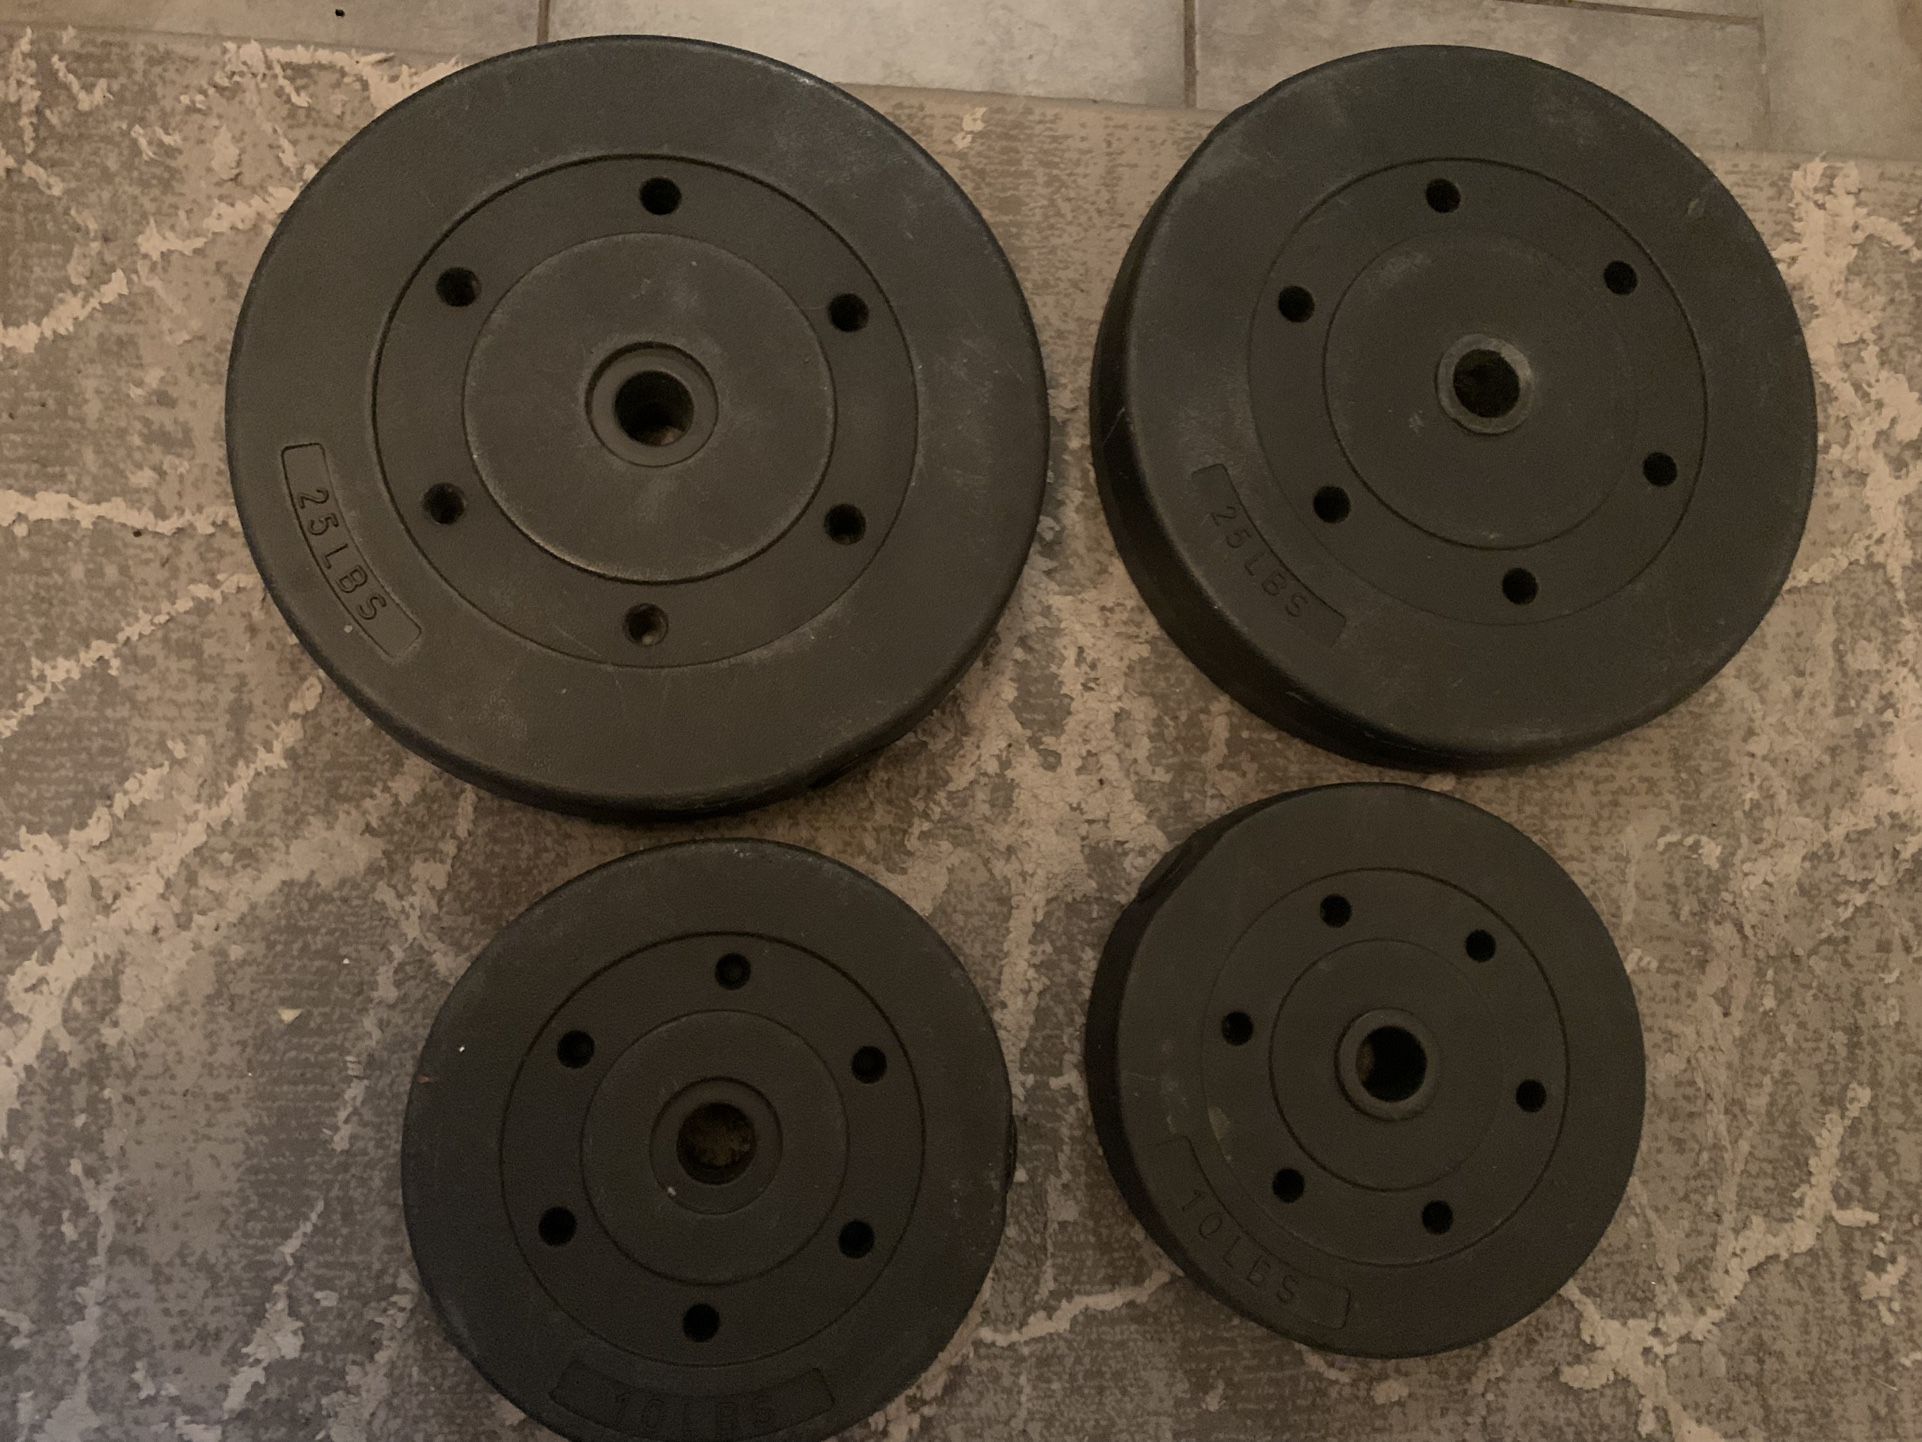 Two 25 Lb Standard 1” Vinyl Weight Plates - plus two 10 lb plates 